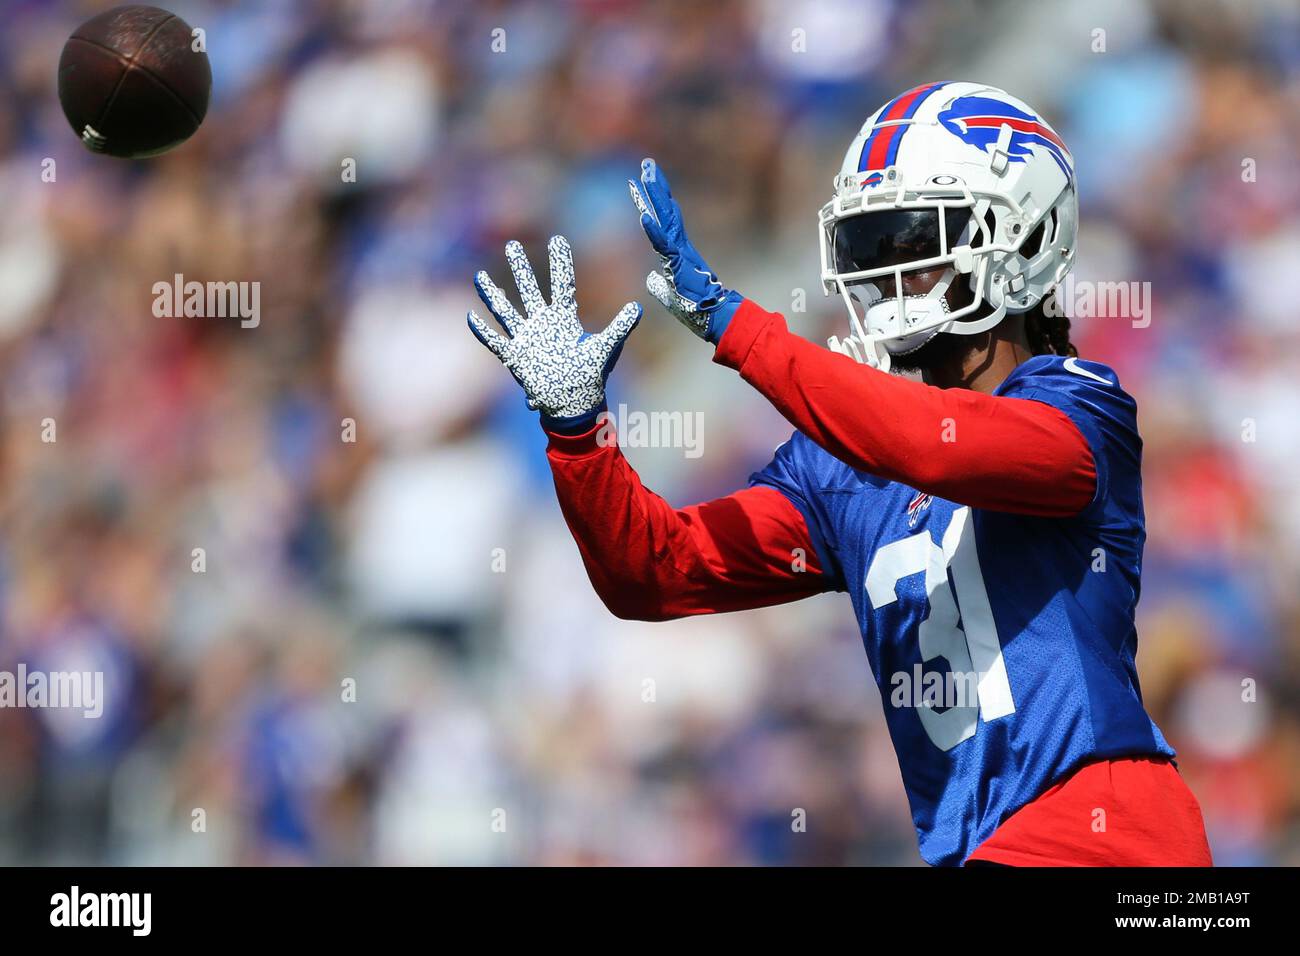 Buffalo Bills safety Damar Hamlin (31) makes a catch during practice at the  NFL football team's training camp in Pittsford, N.Y., Monday July 25, 2022.  (AP Photo/Joshua Bessex Stock Photo - Alamy